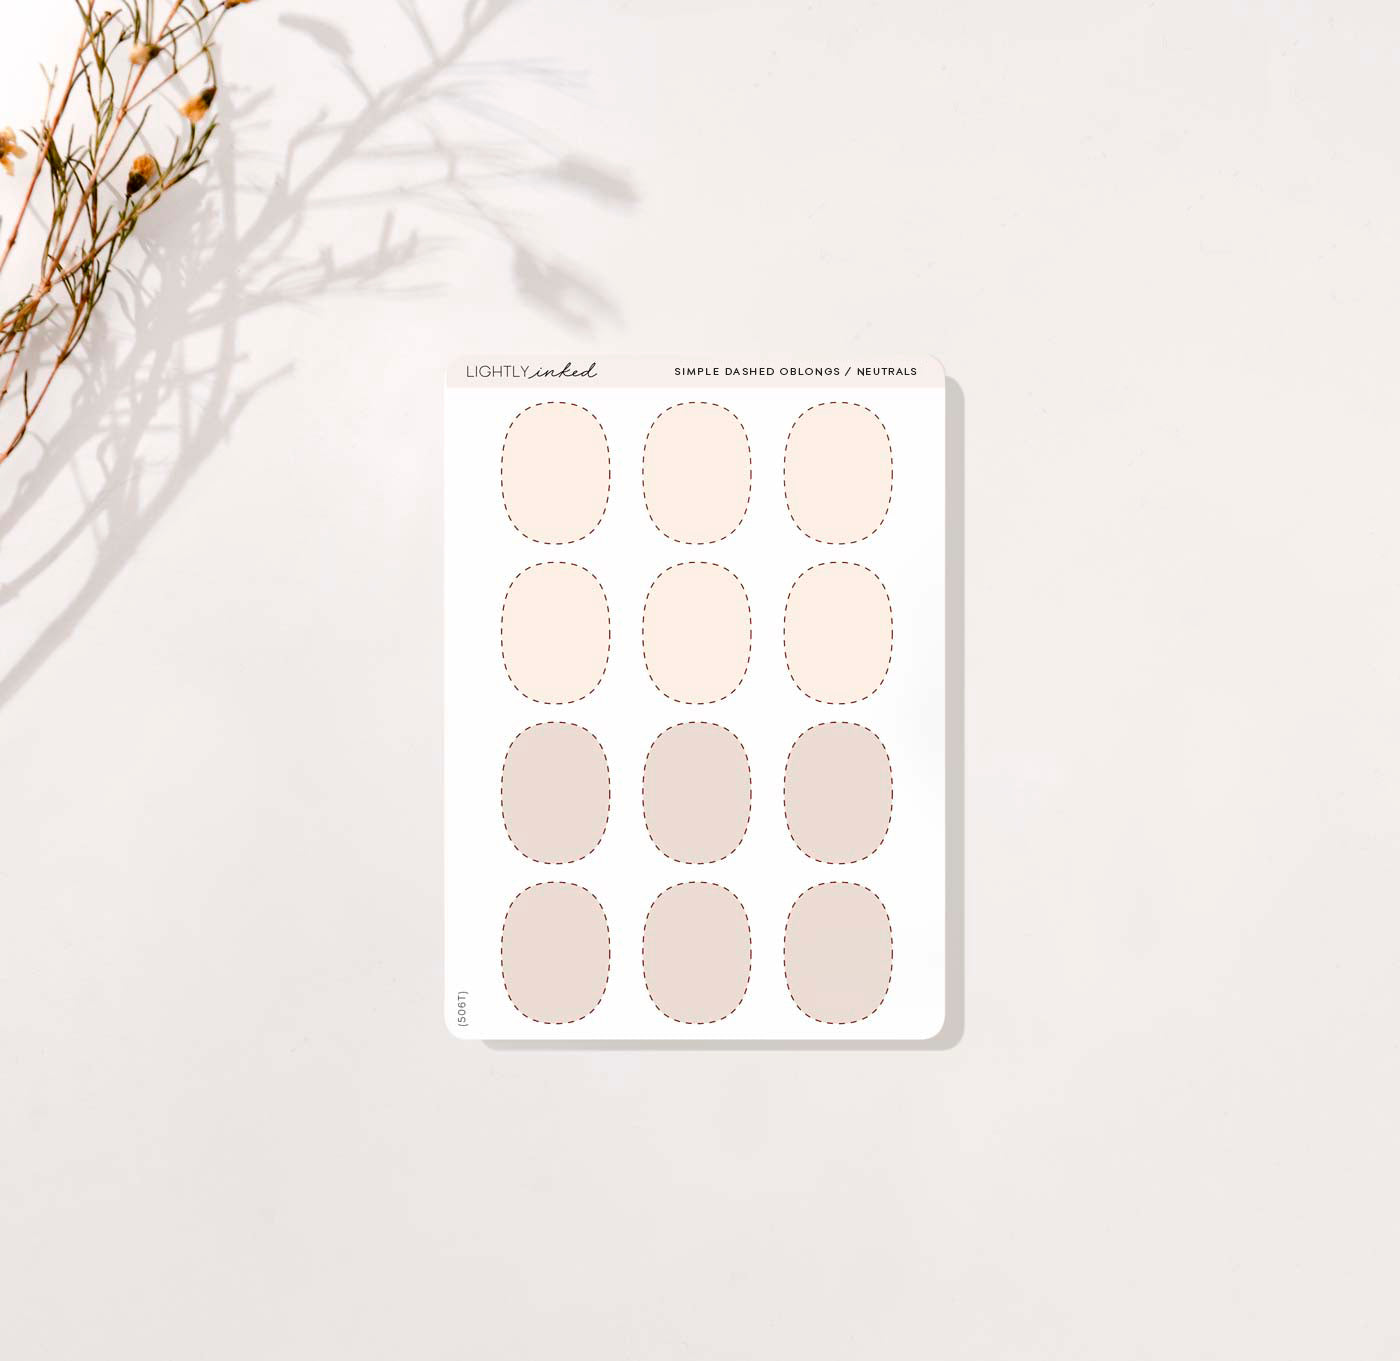 Simple Dashed Oblongs/ Neutrals